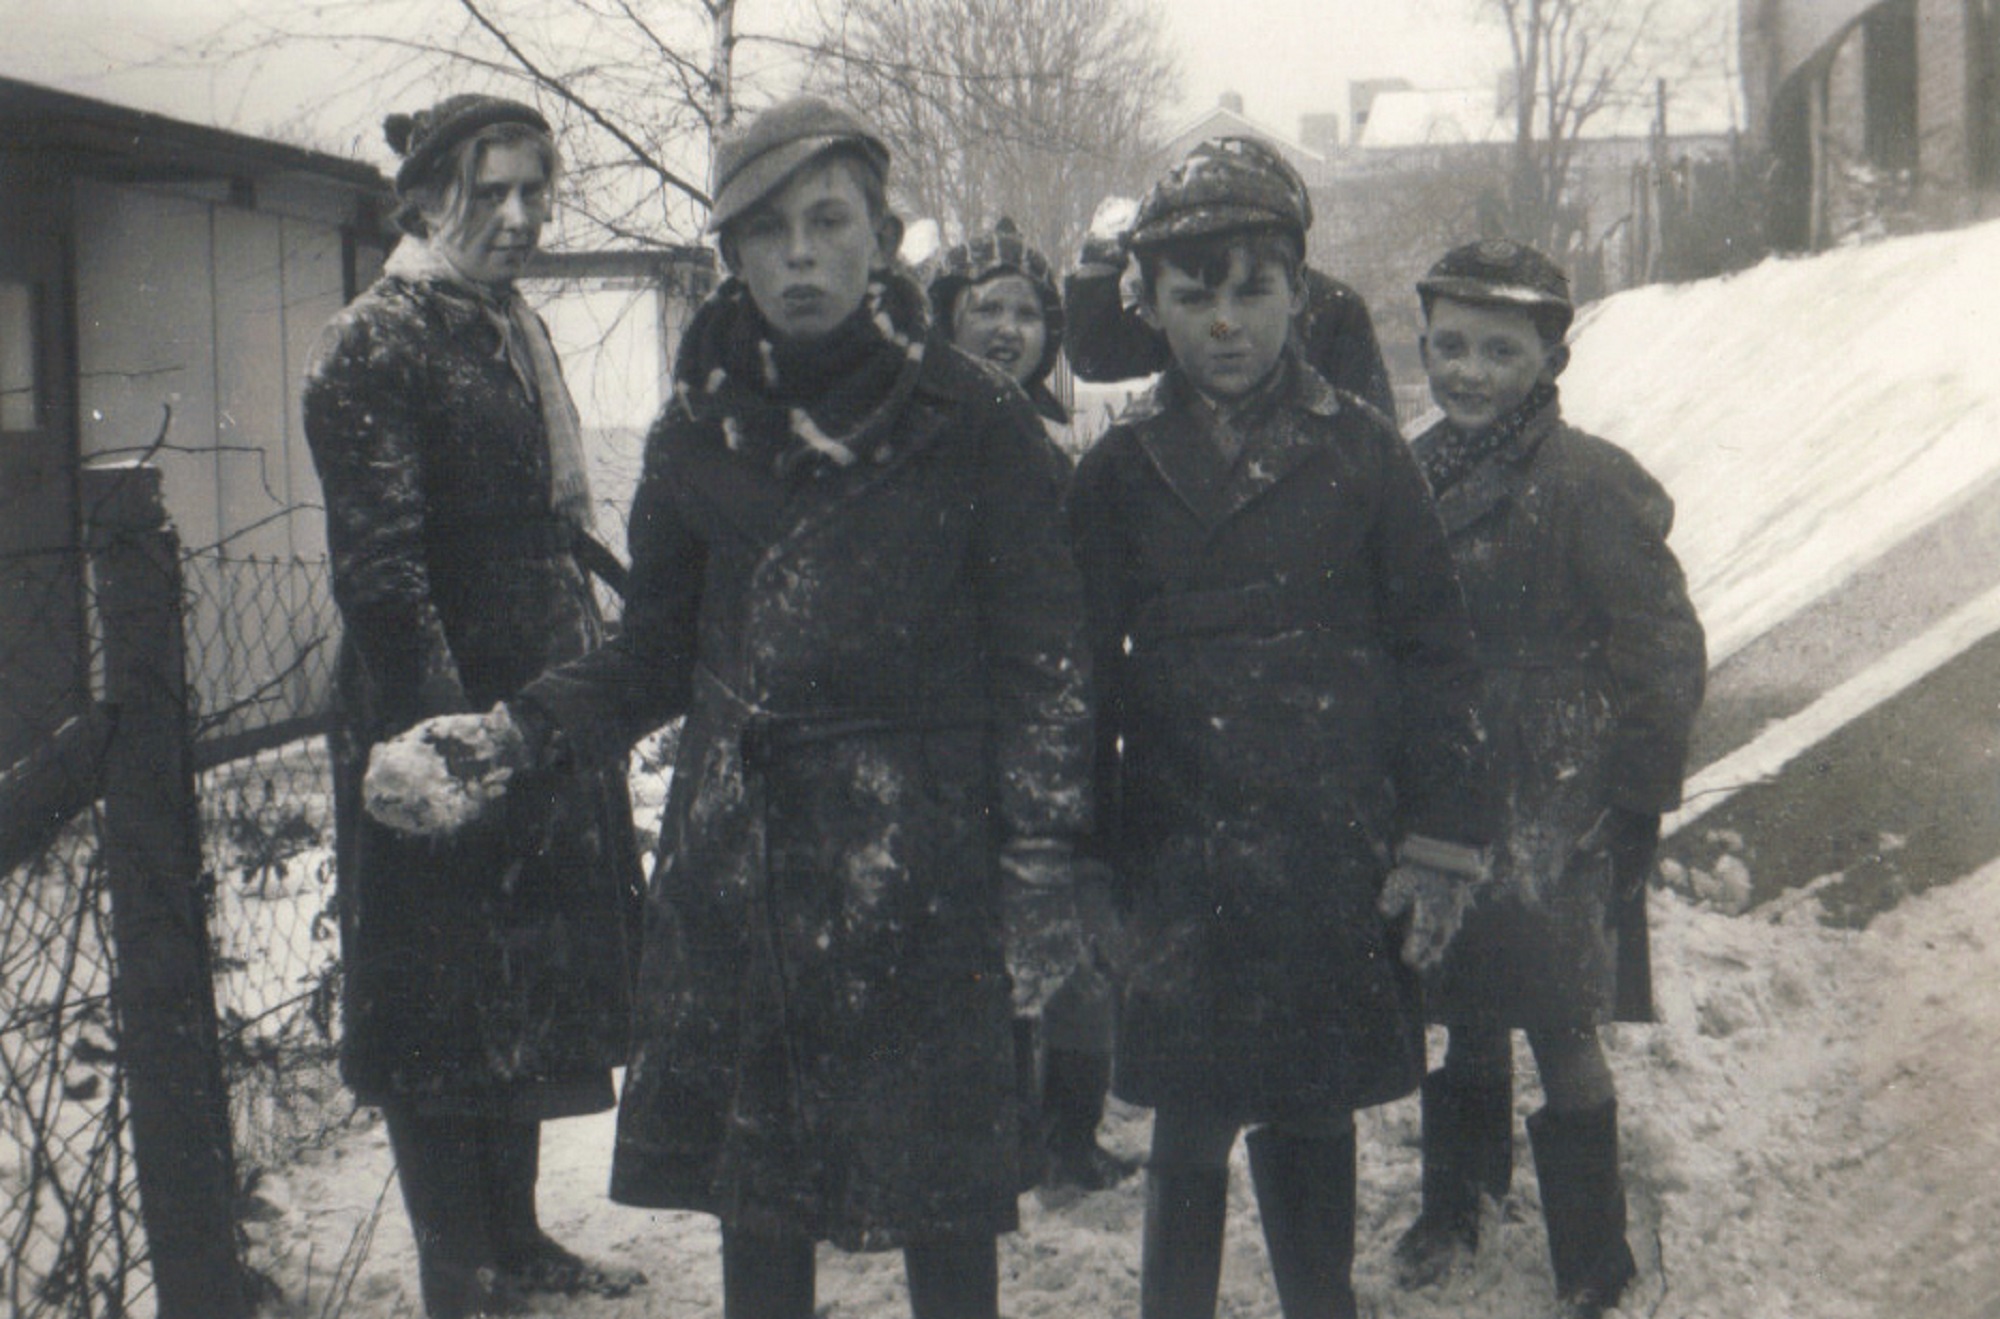 A group outside the prefabs in the snow, Dartmouth Park Hill, London N19